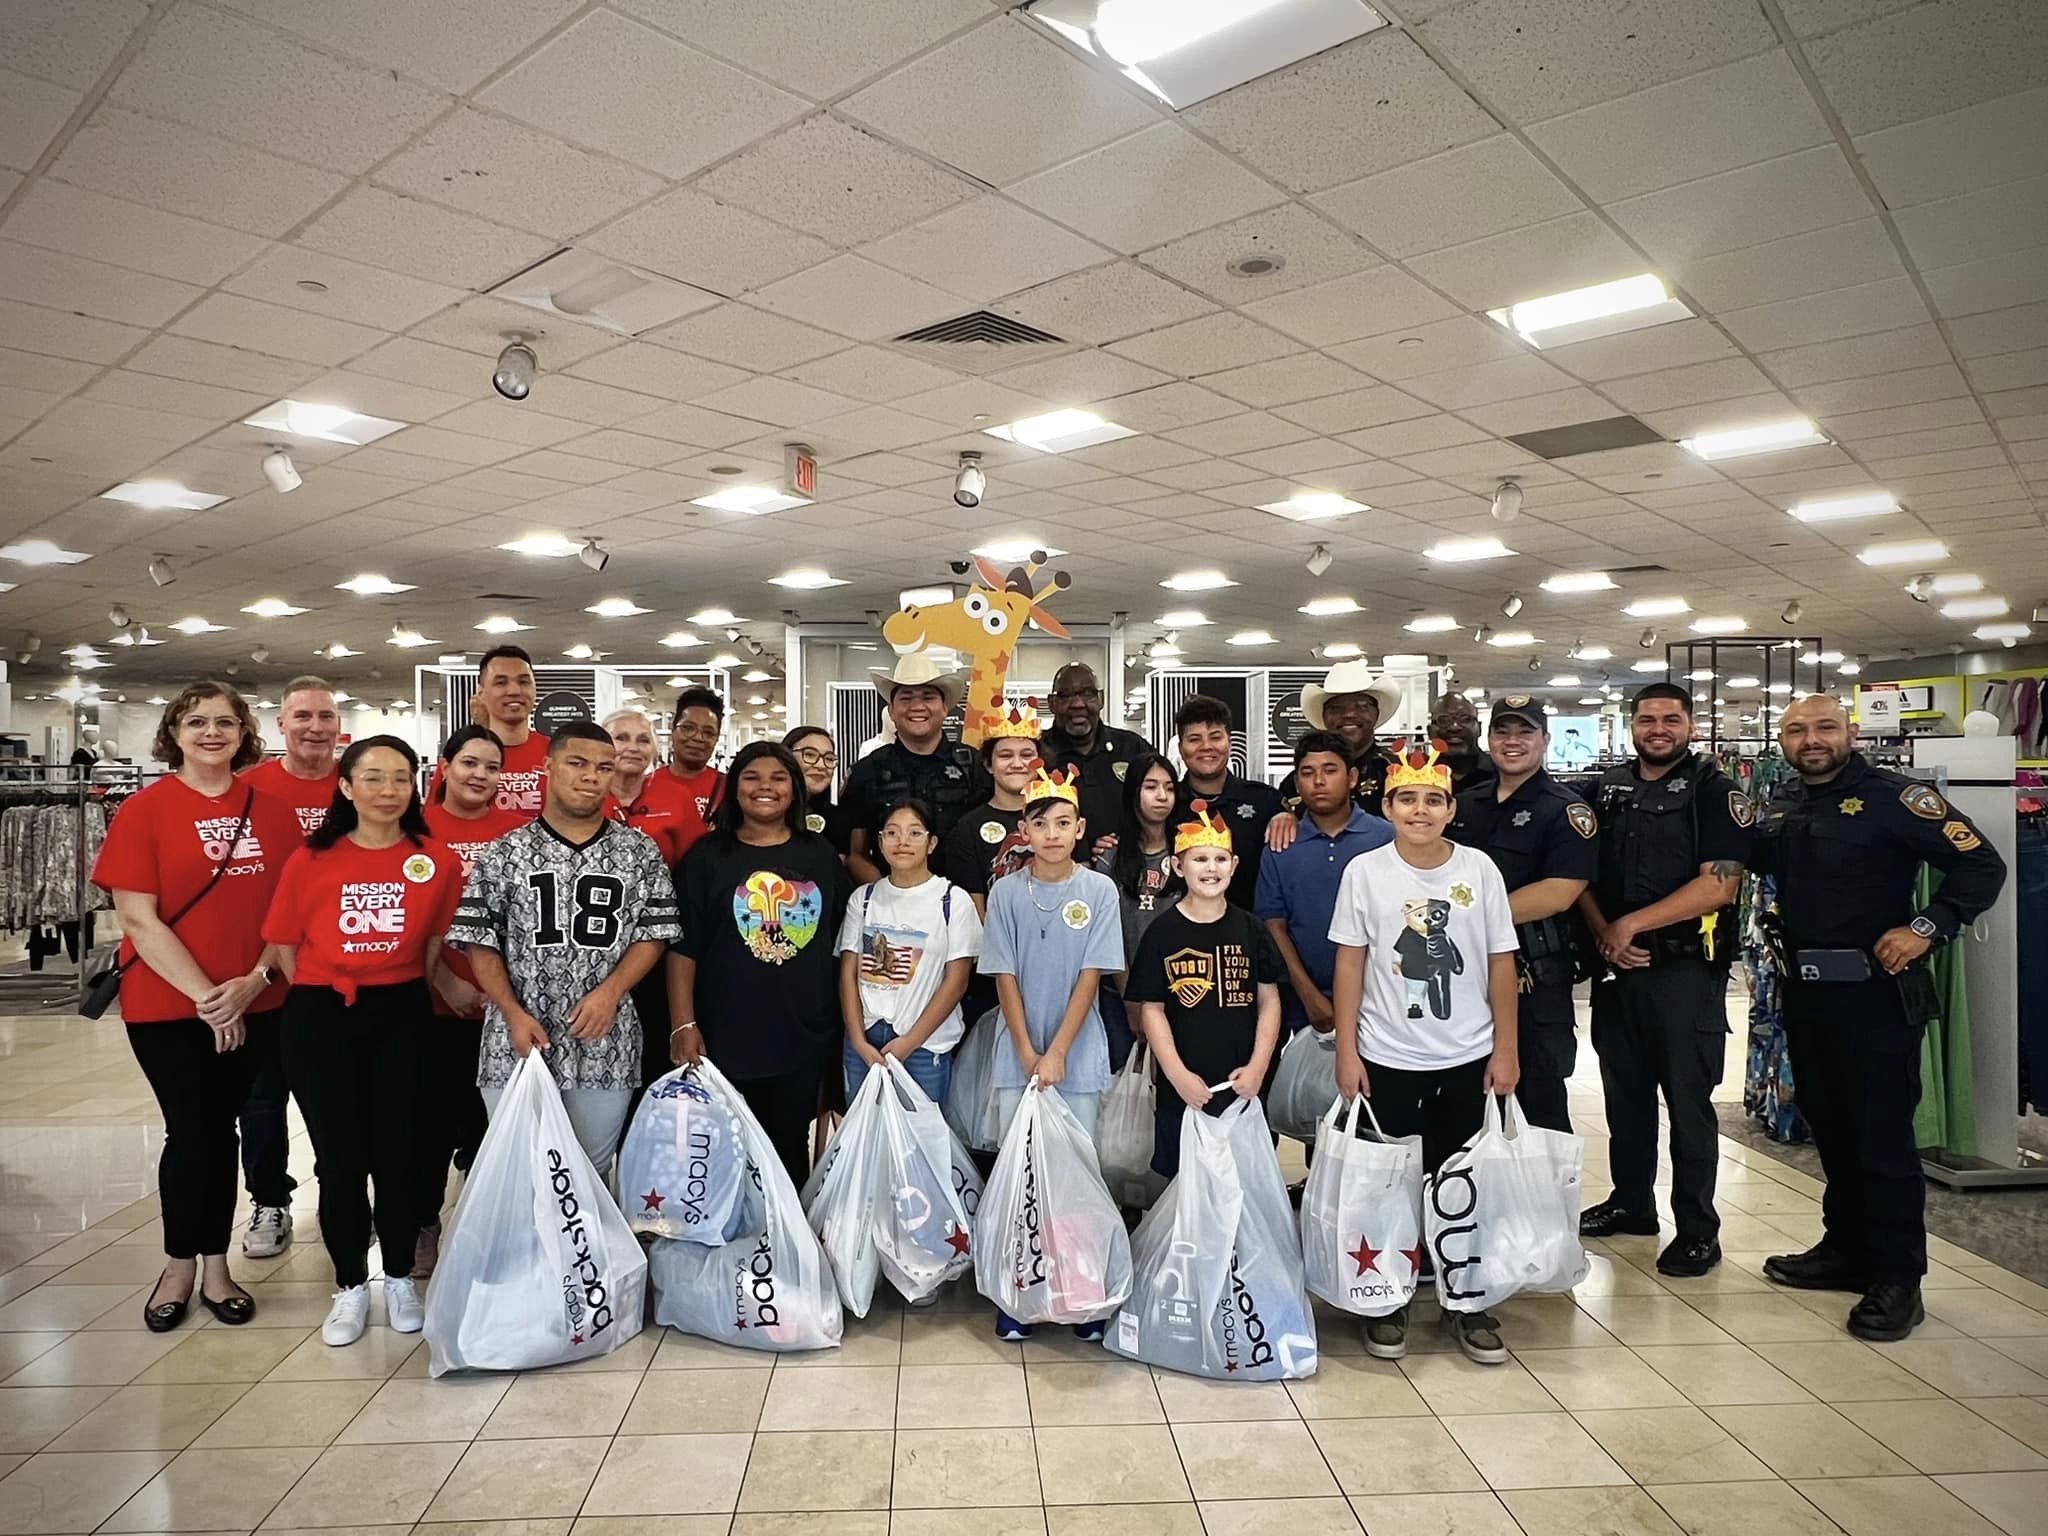  Harris County Sheriff's Office Hosts Inclusive Back-to-School Shopping Event at Macy's in Willowbrook Mall